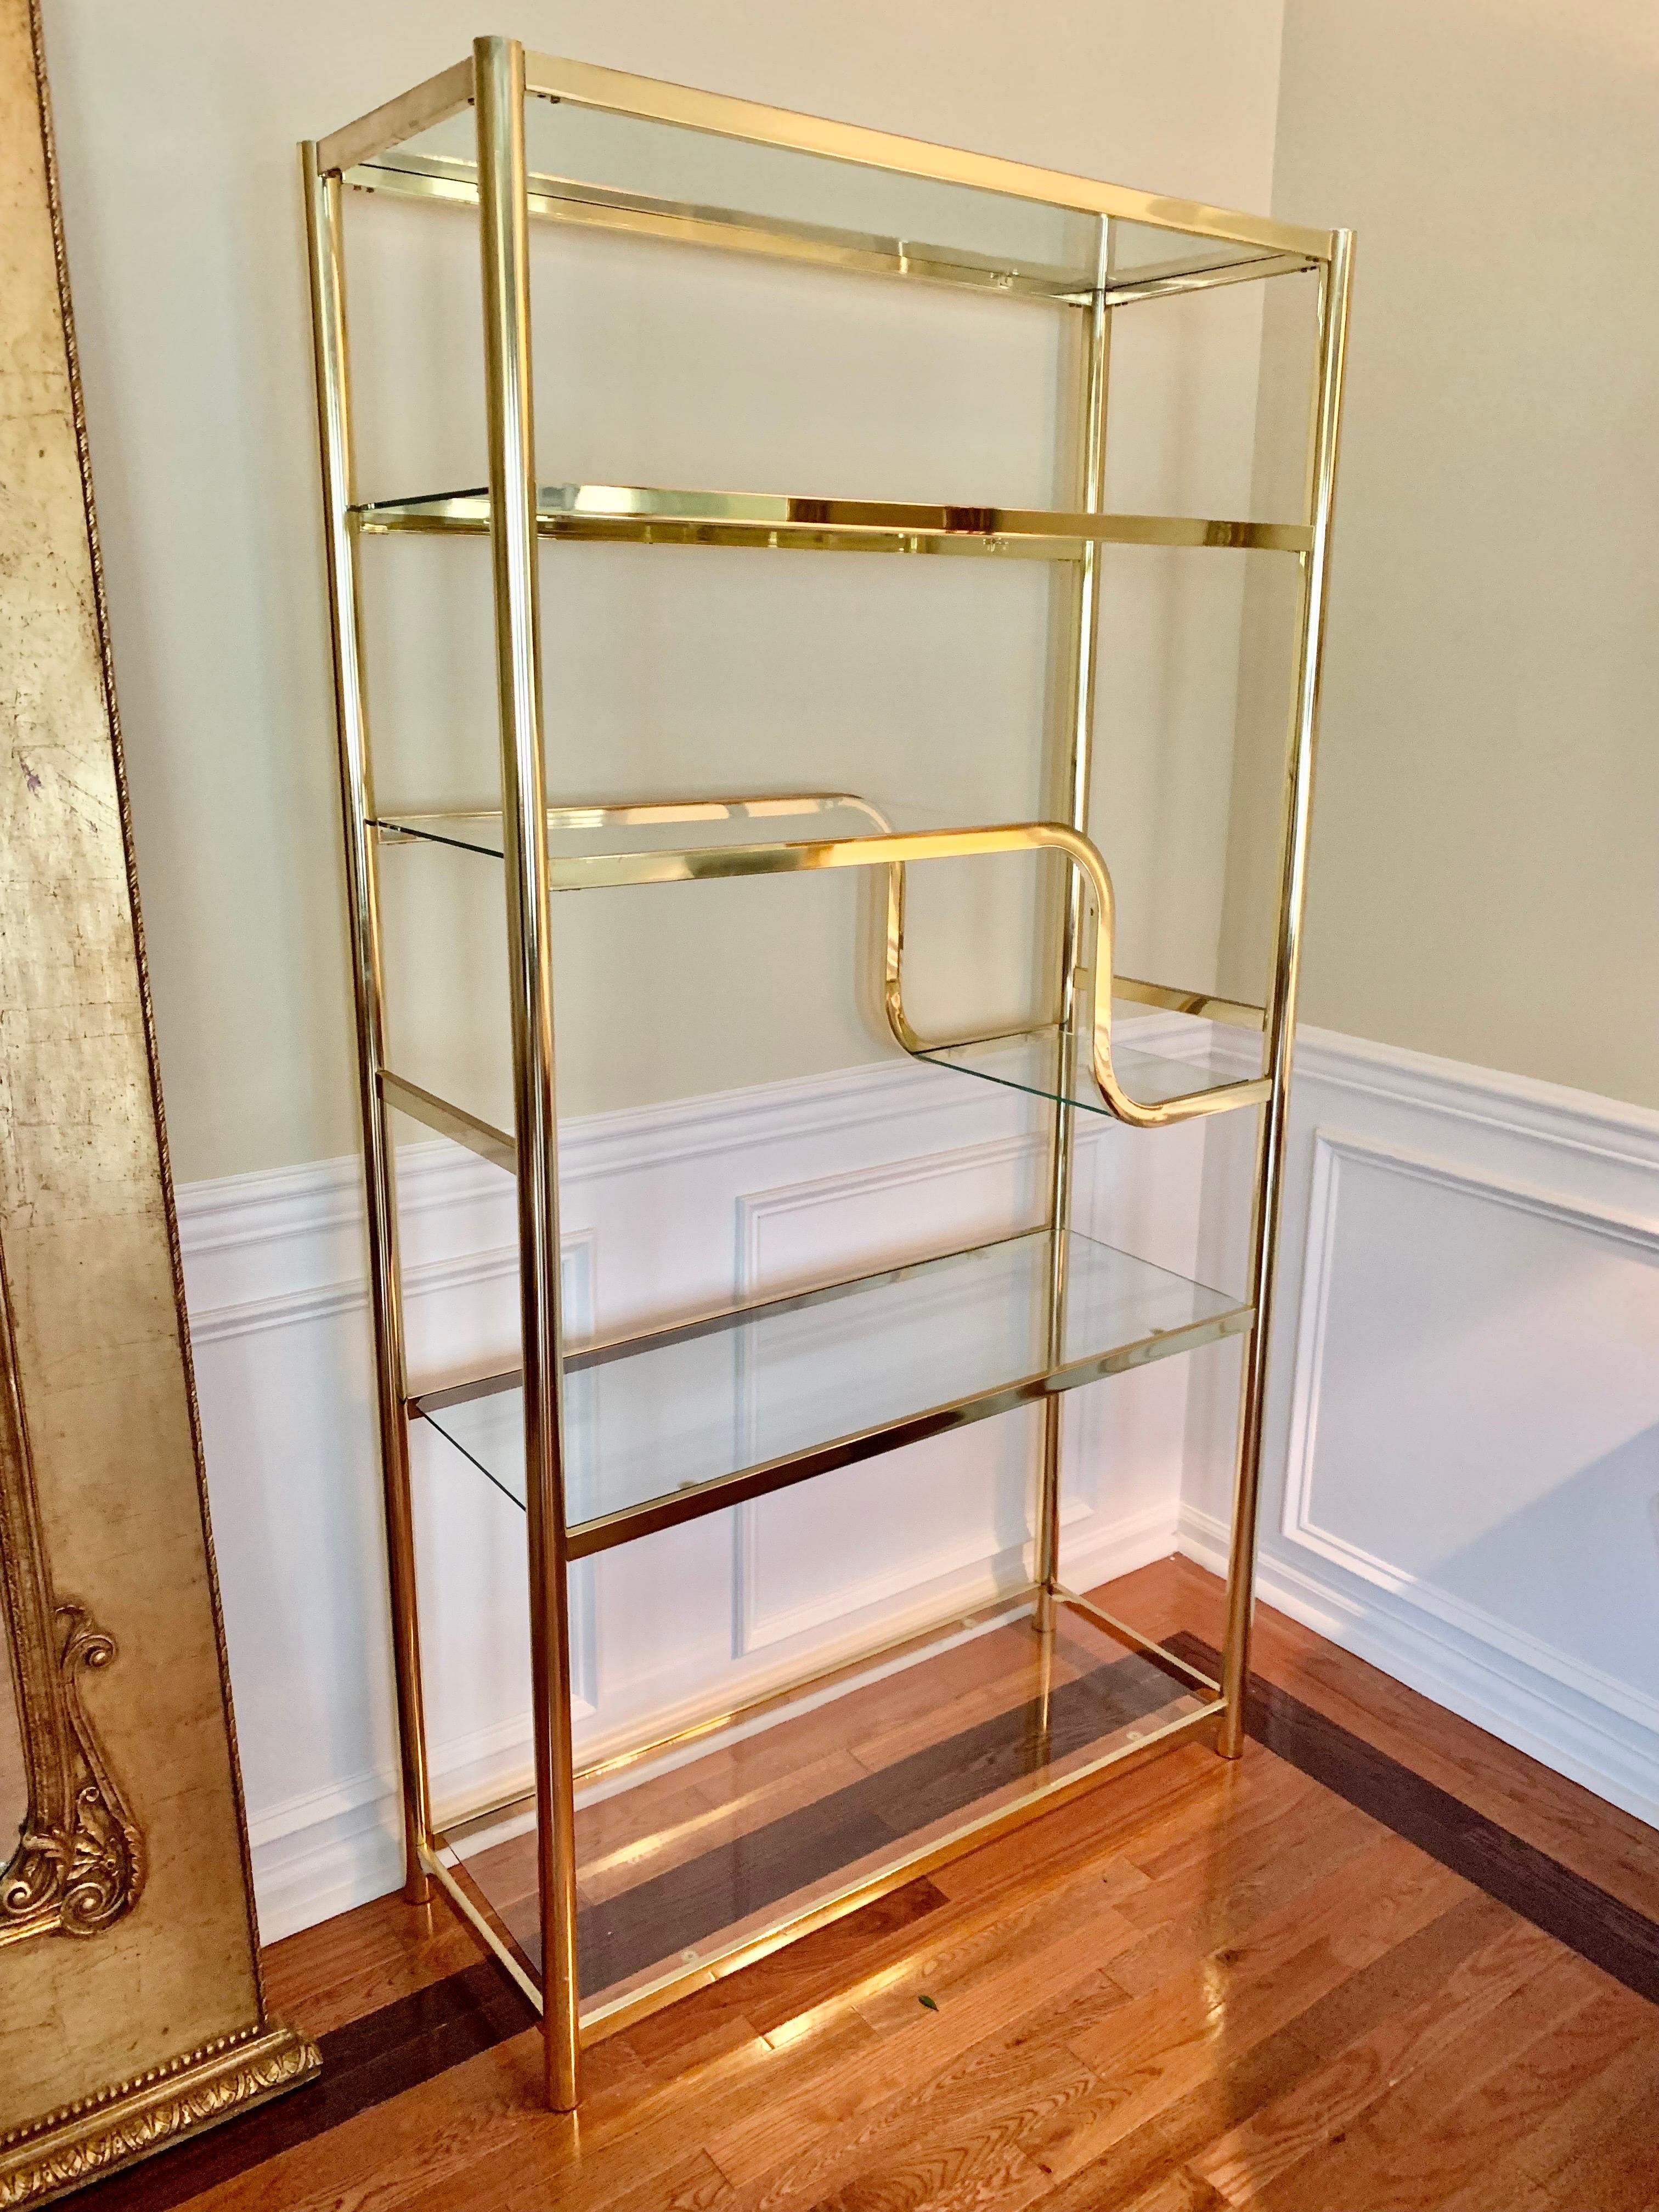 Elegant brass etagere by Design Institute of America in the style of Milo Baughman. Includes four full length glass shelves and two smaller ones.